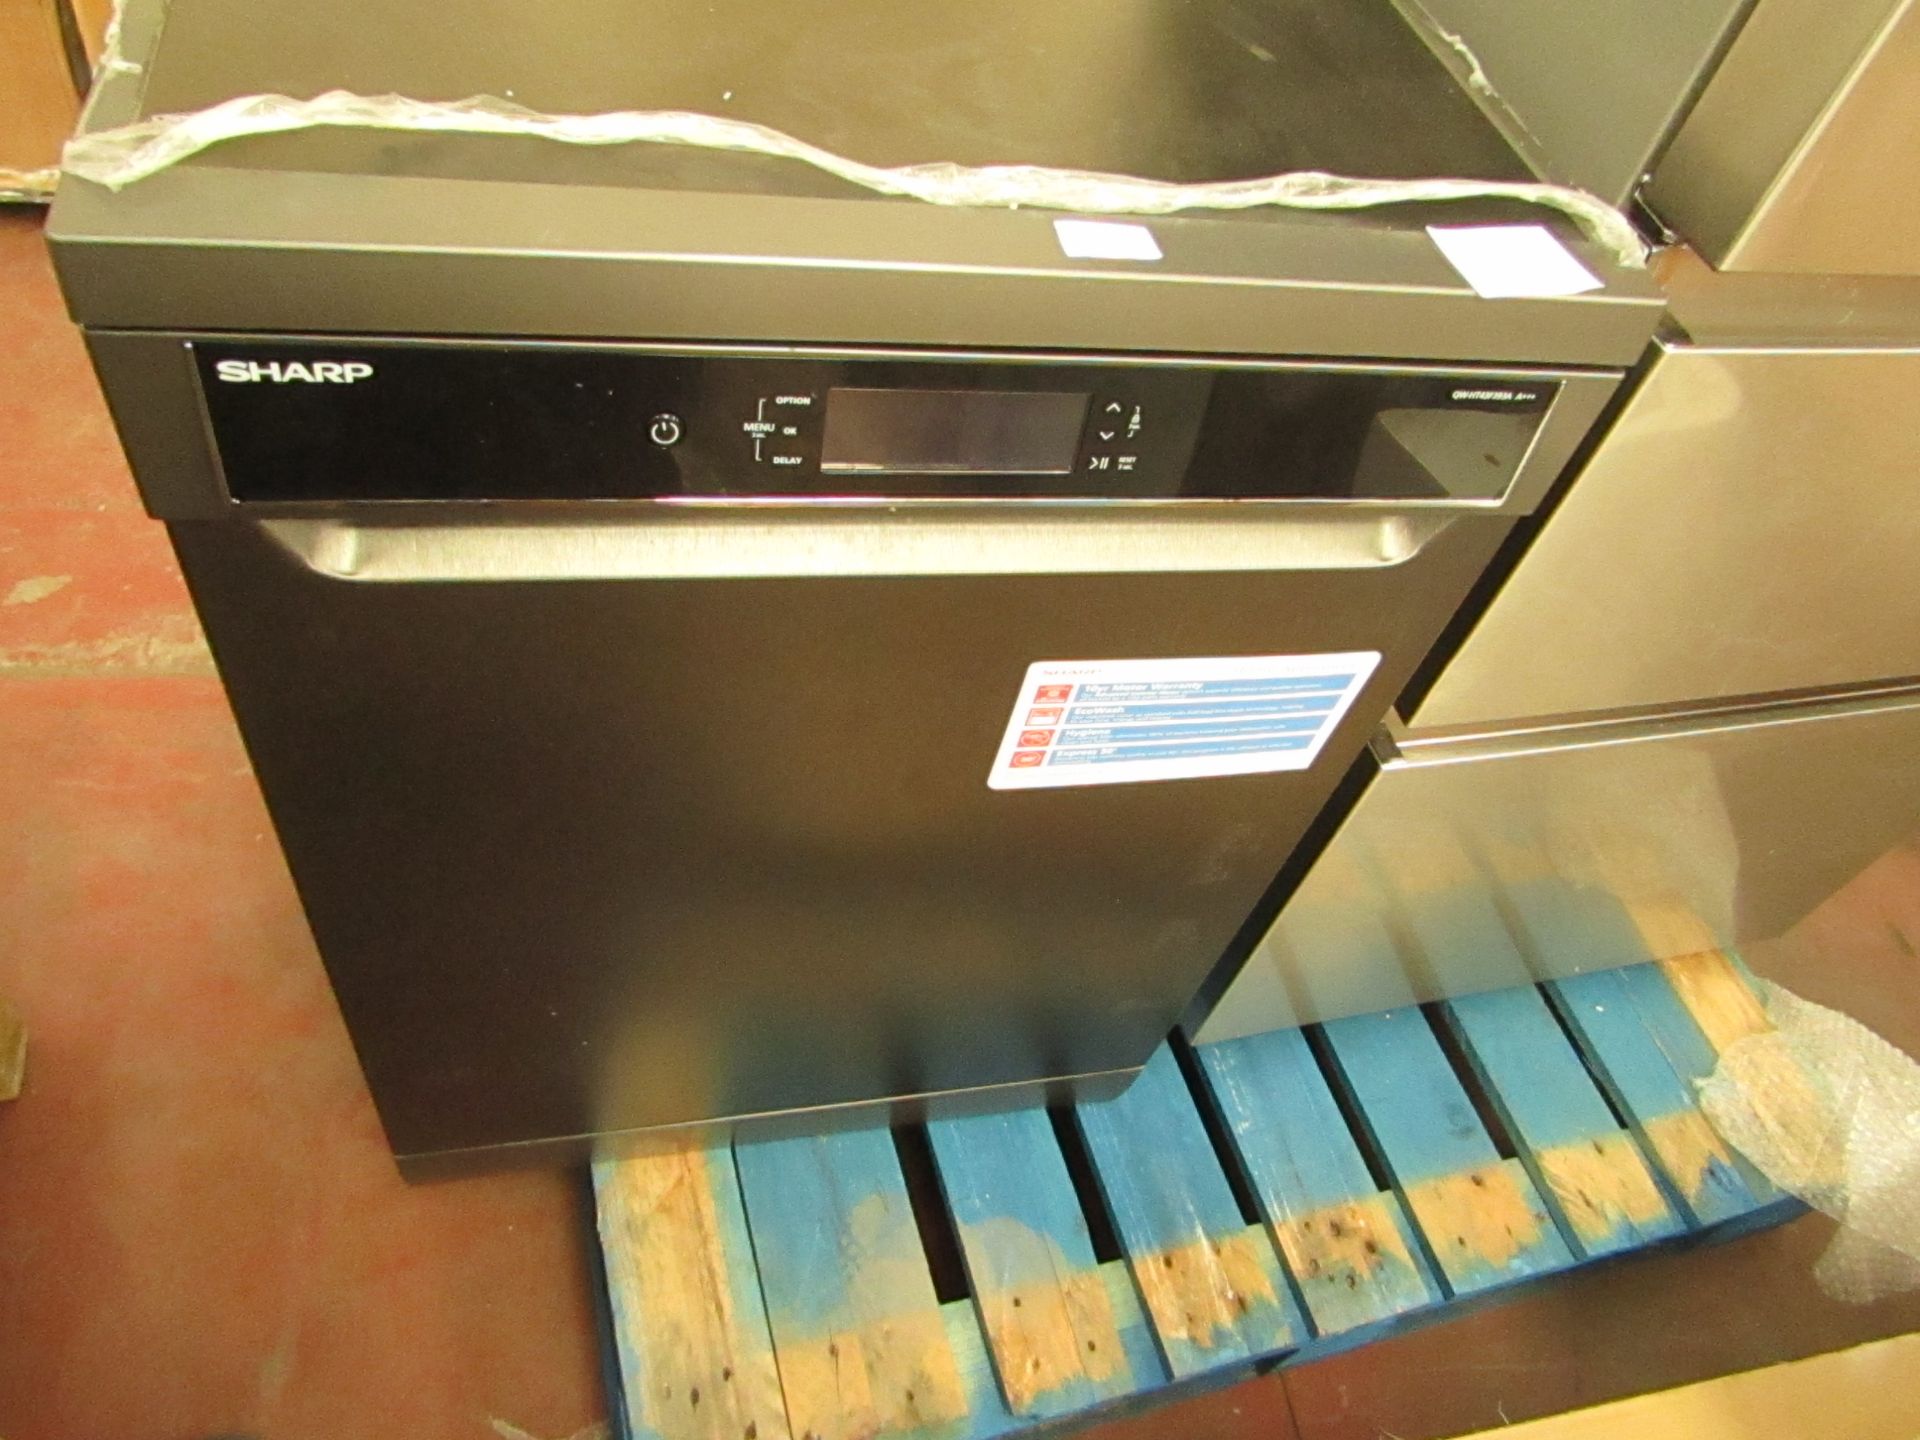 Sharp QW-HT43F393A dish washer, powers on